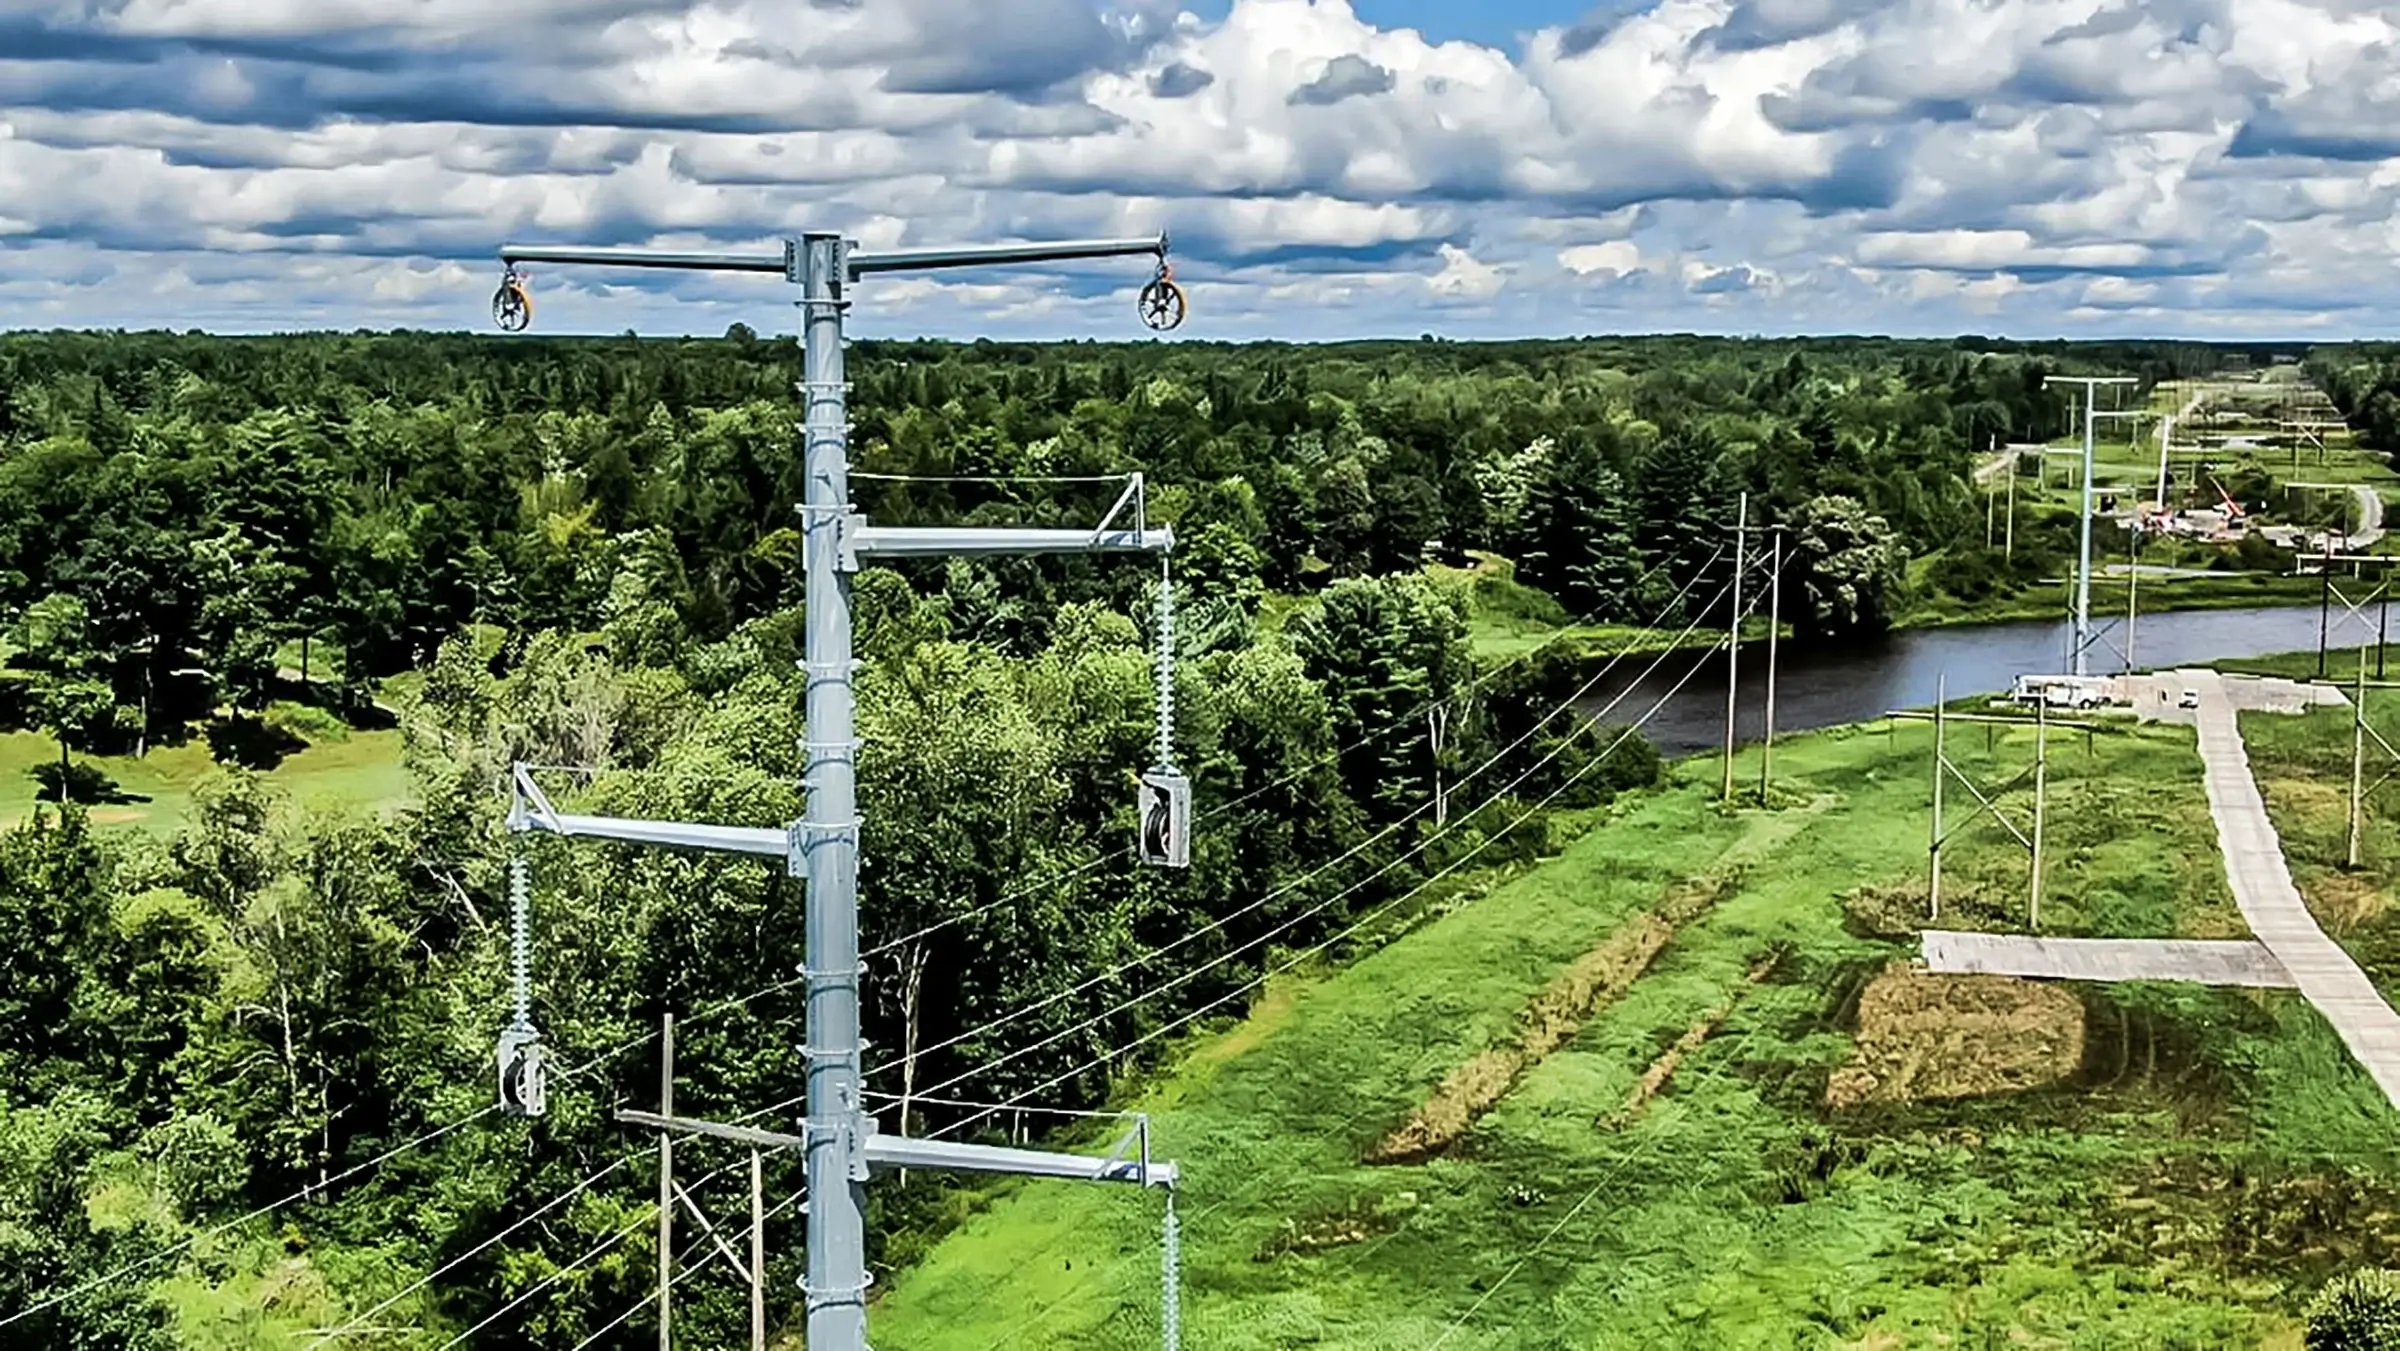 Large power lines run through a green wooded, rural area.